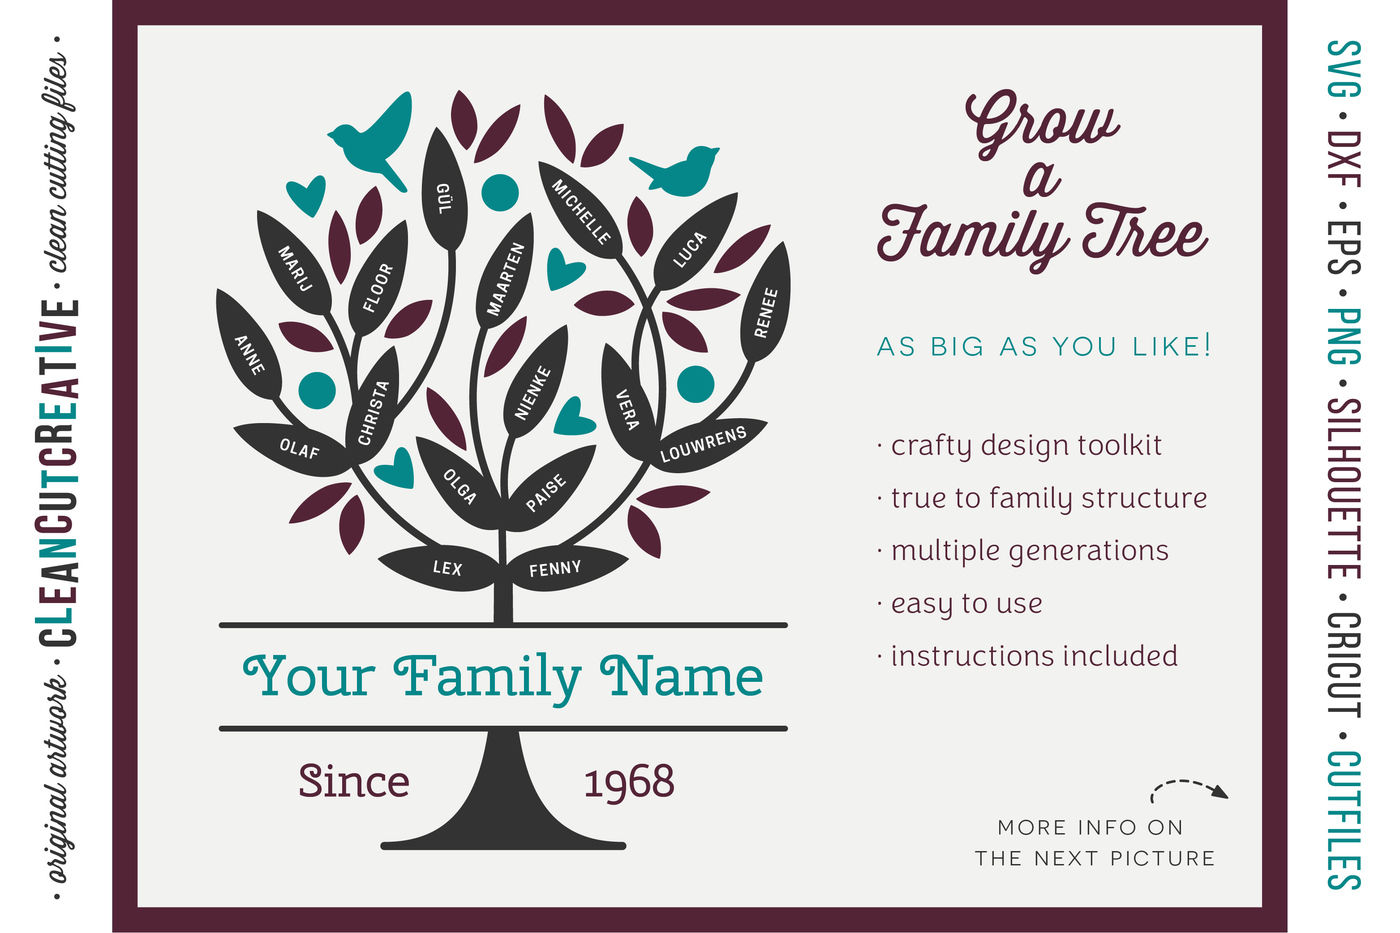 Download Grow a FAMILY TREE! - crafty design toolkit - SVG DXF EPS ...